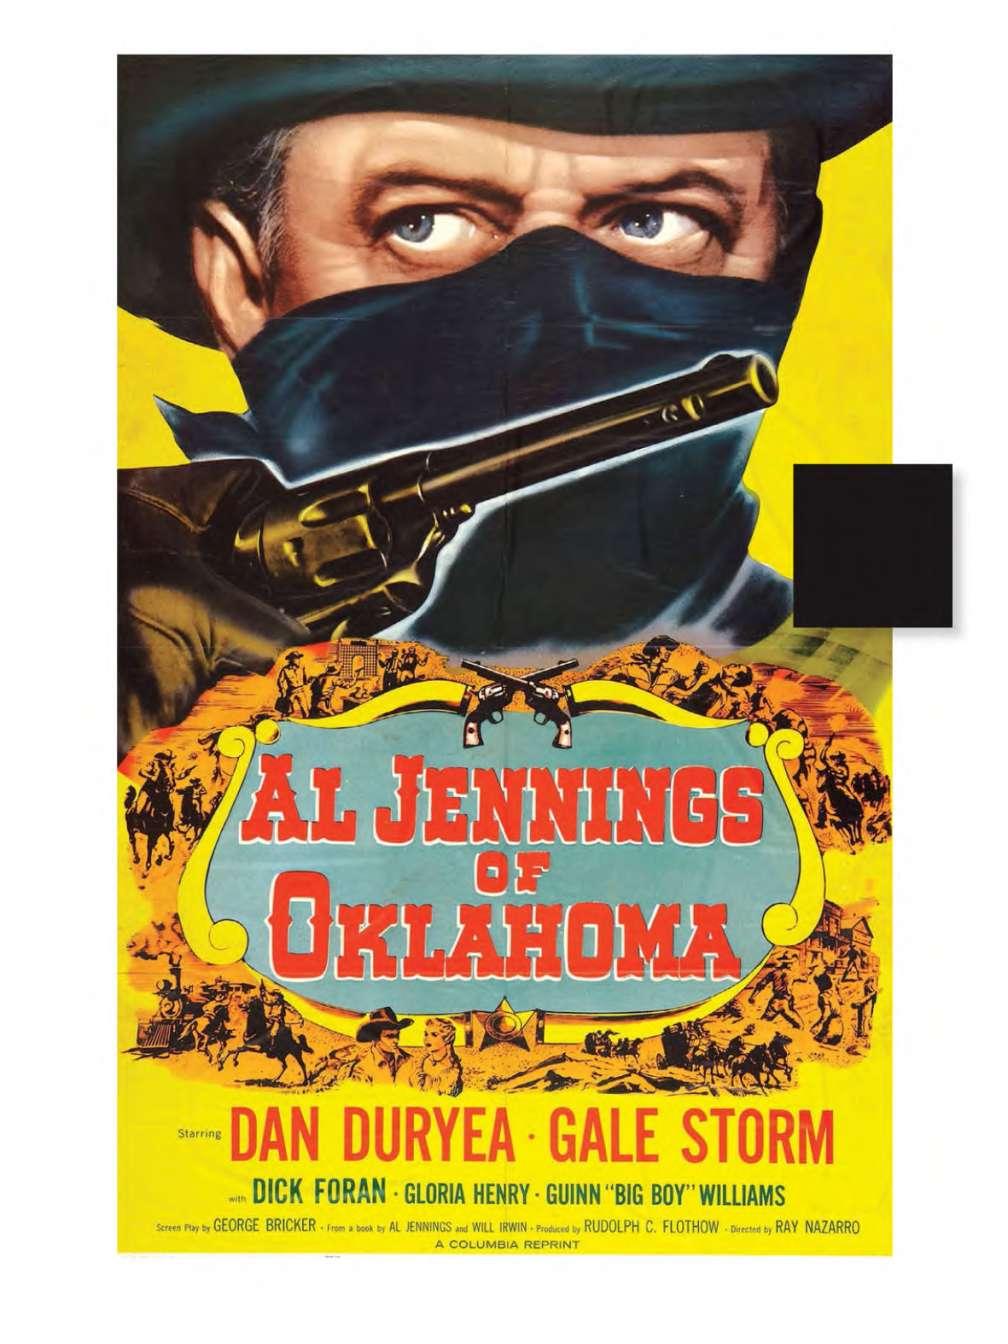 Dan Duryea took to the screen as Jennings in 1951, 10 years before the